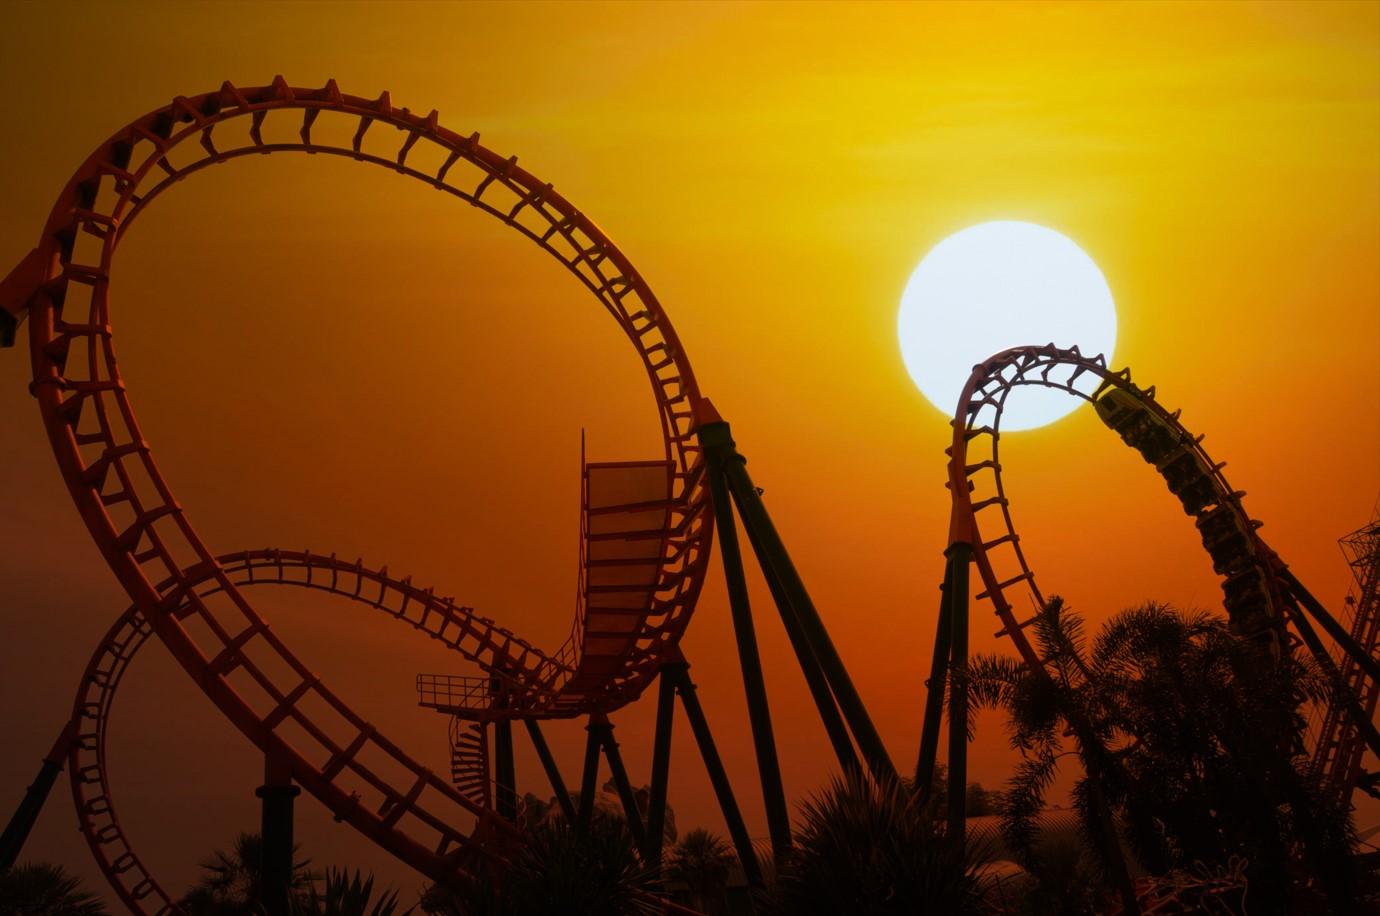 large unoccupied roller coaster silhouetted against an eerie sunset